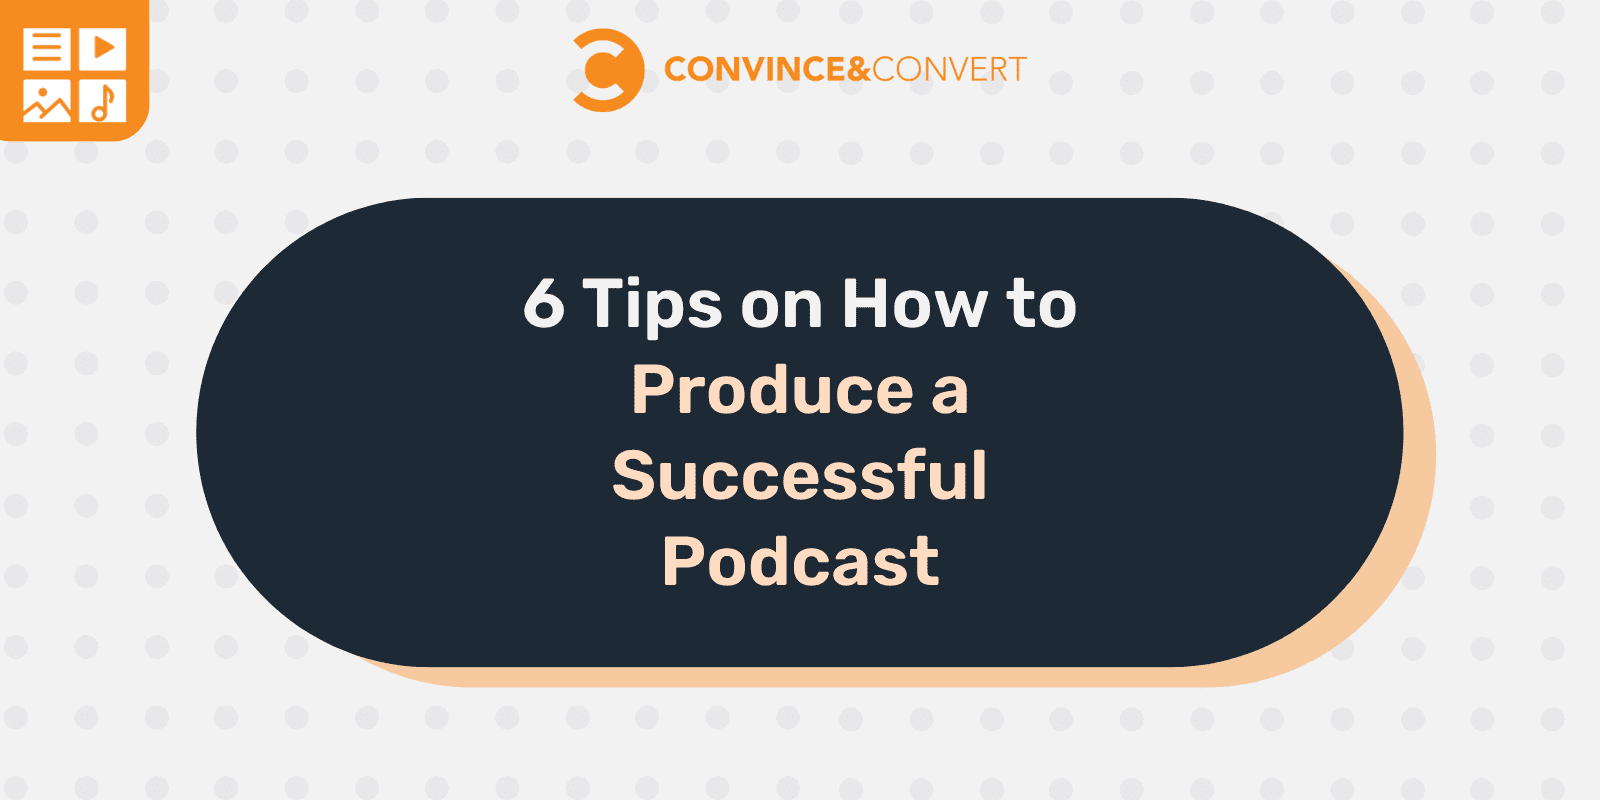 6 Tips on How to Produce a Successful Podcast 1 EarnFreeCashOnline